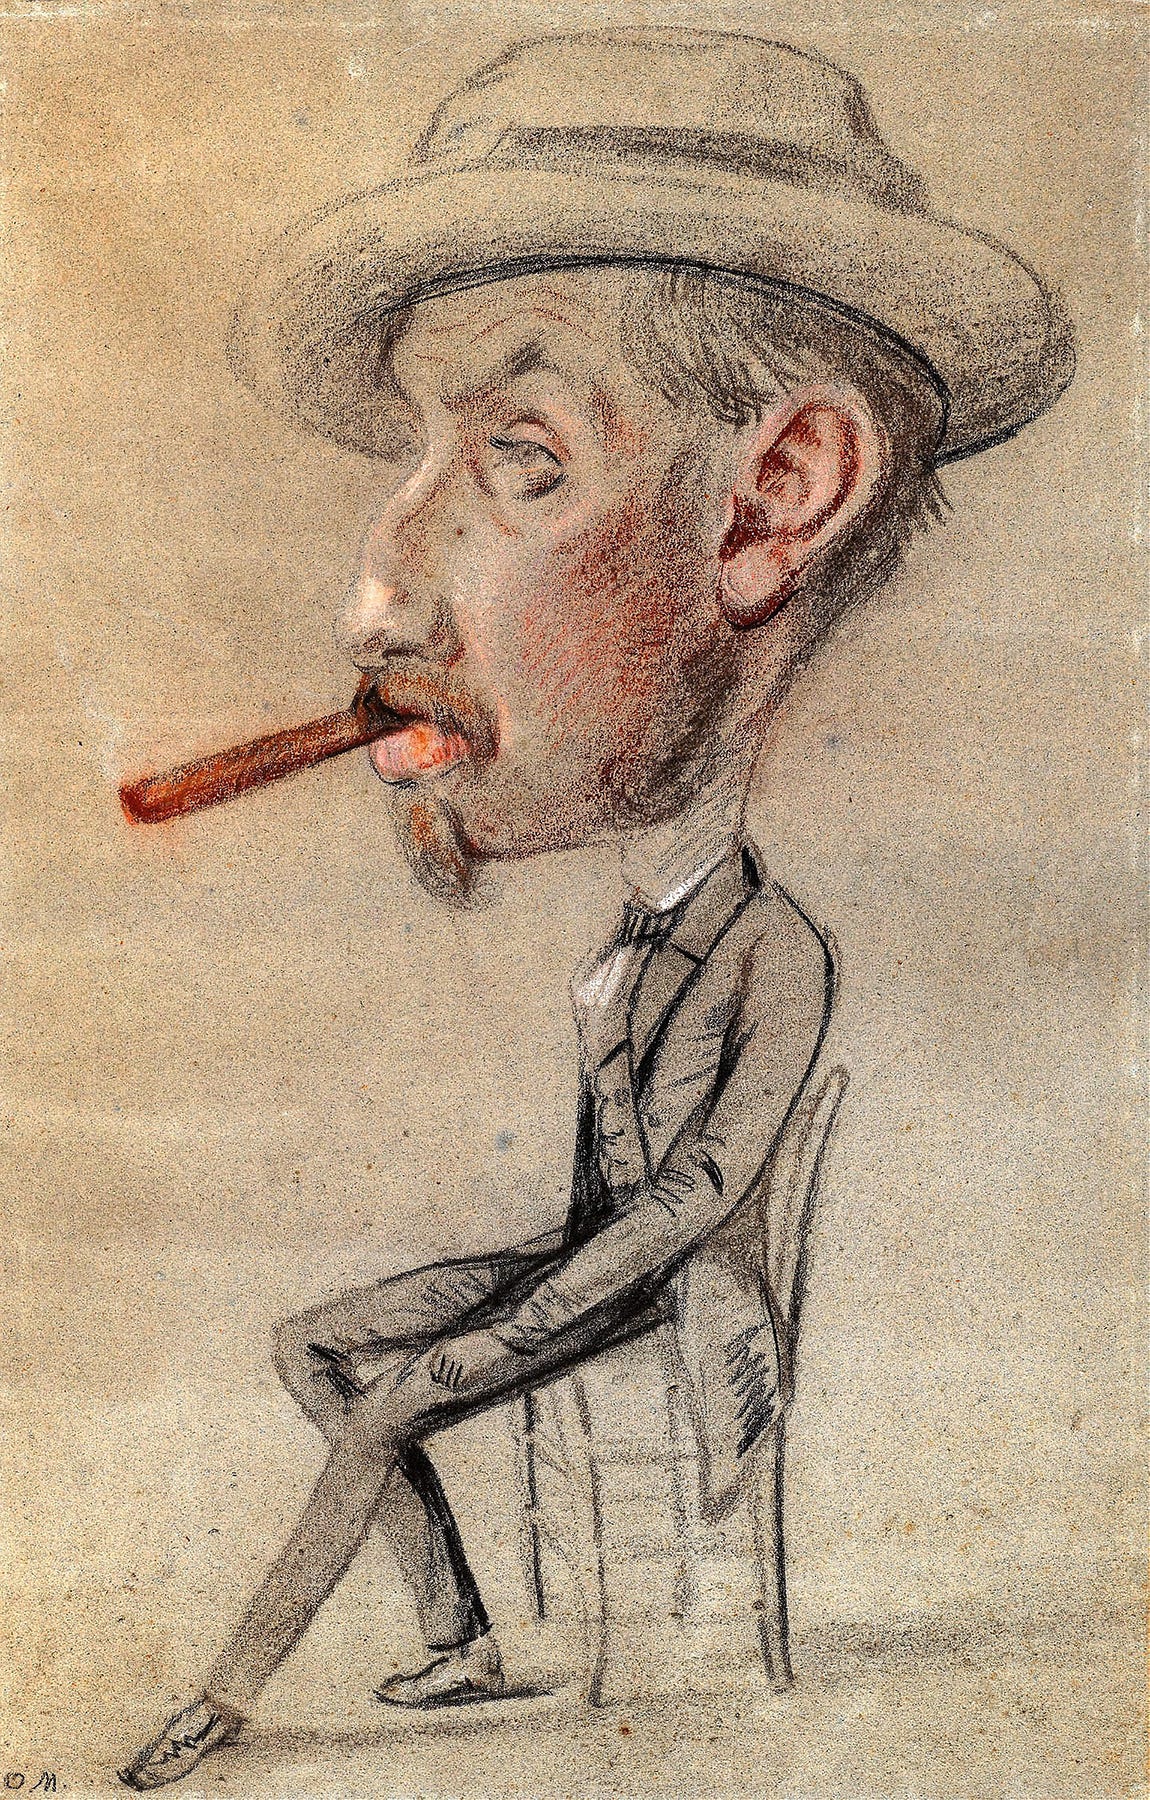 Caricature of a Man with a Big Cigar (1855–1856)